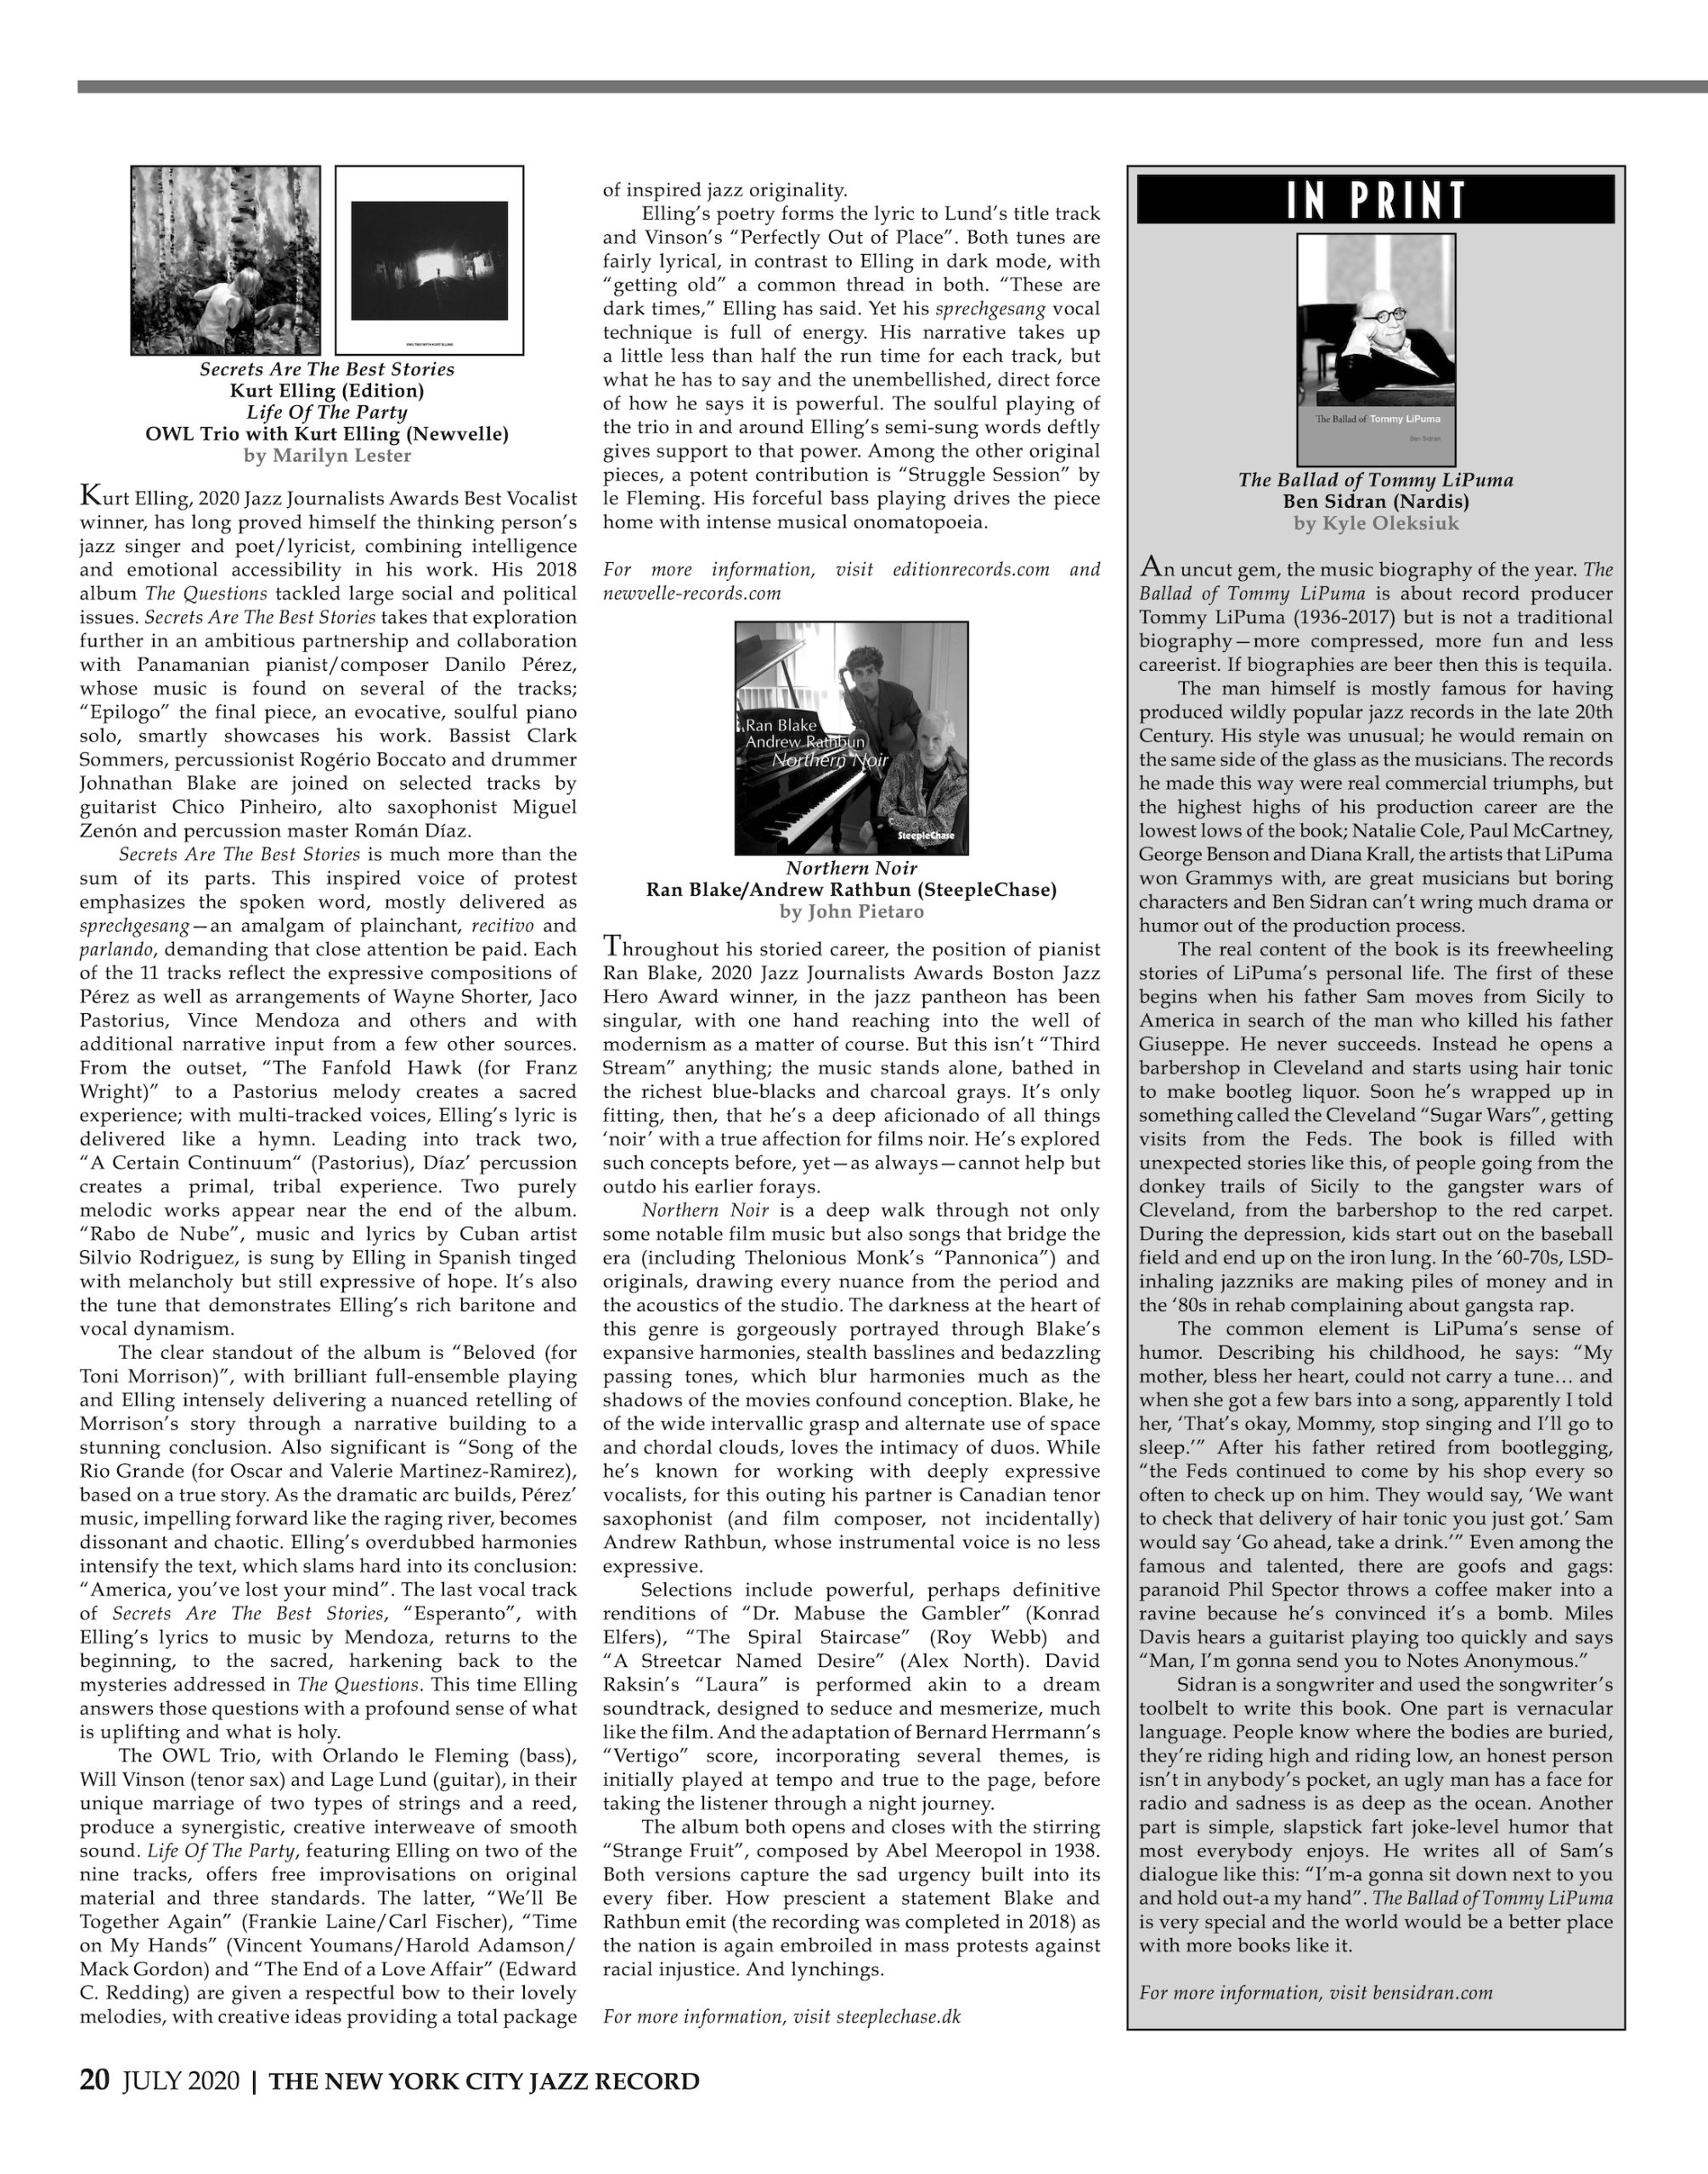 New York City Jazz Record Review